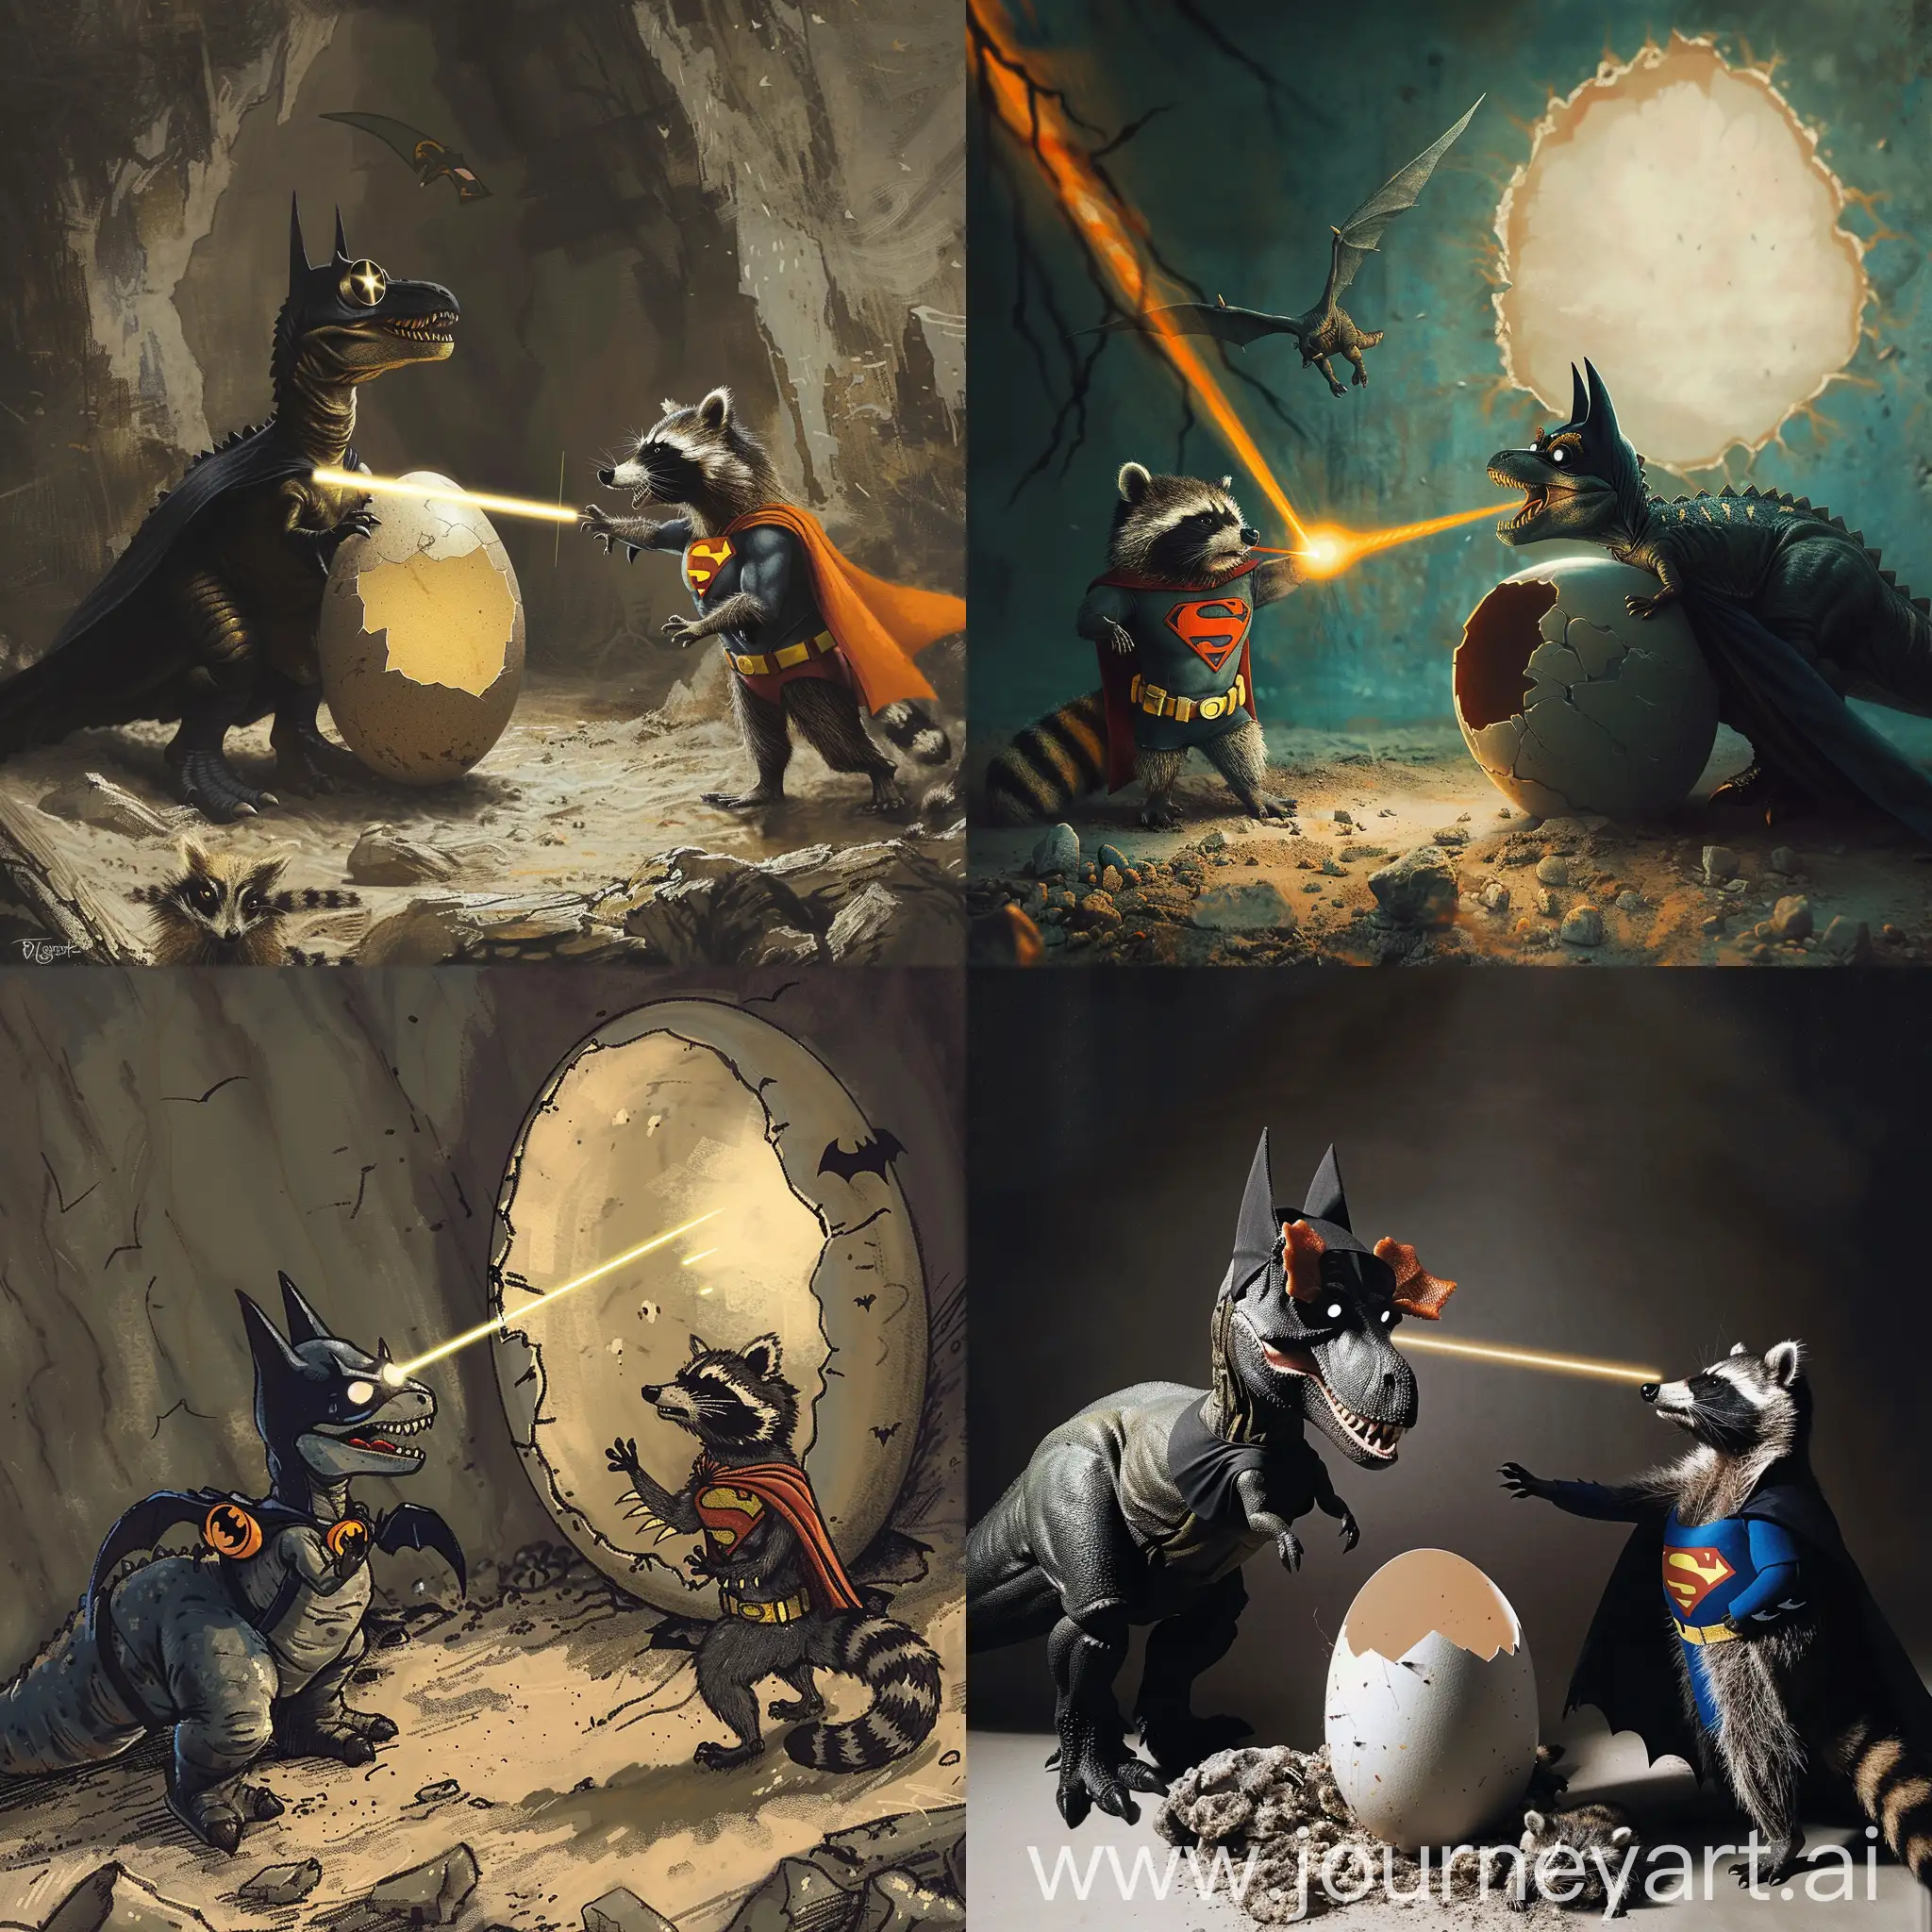 A dinosaur dressed as batman comes out of an egg and shoots laser from his eyes towards a racoon dressed as superman